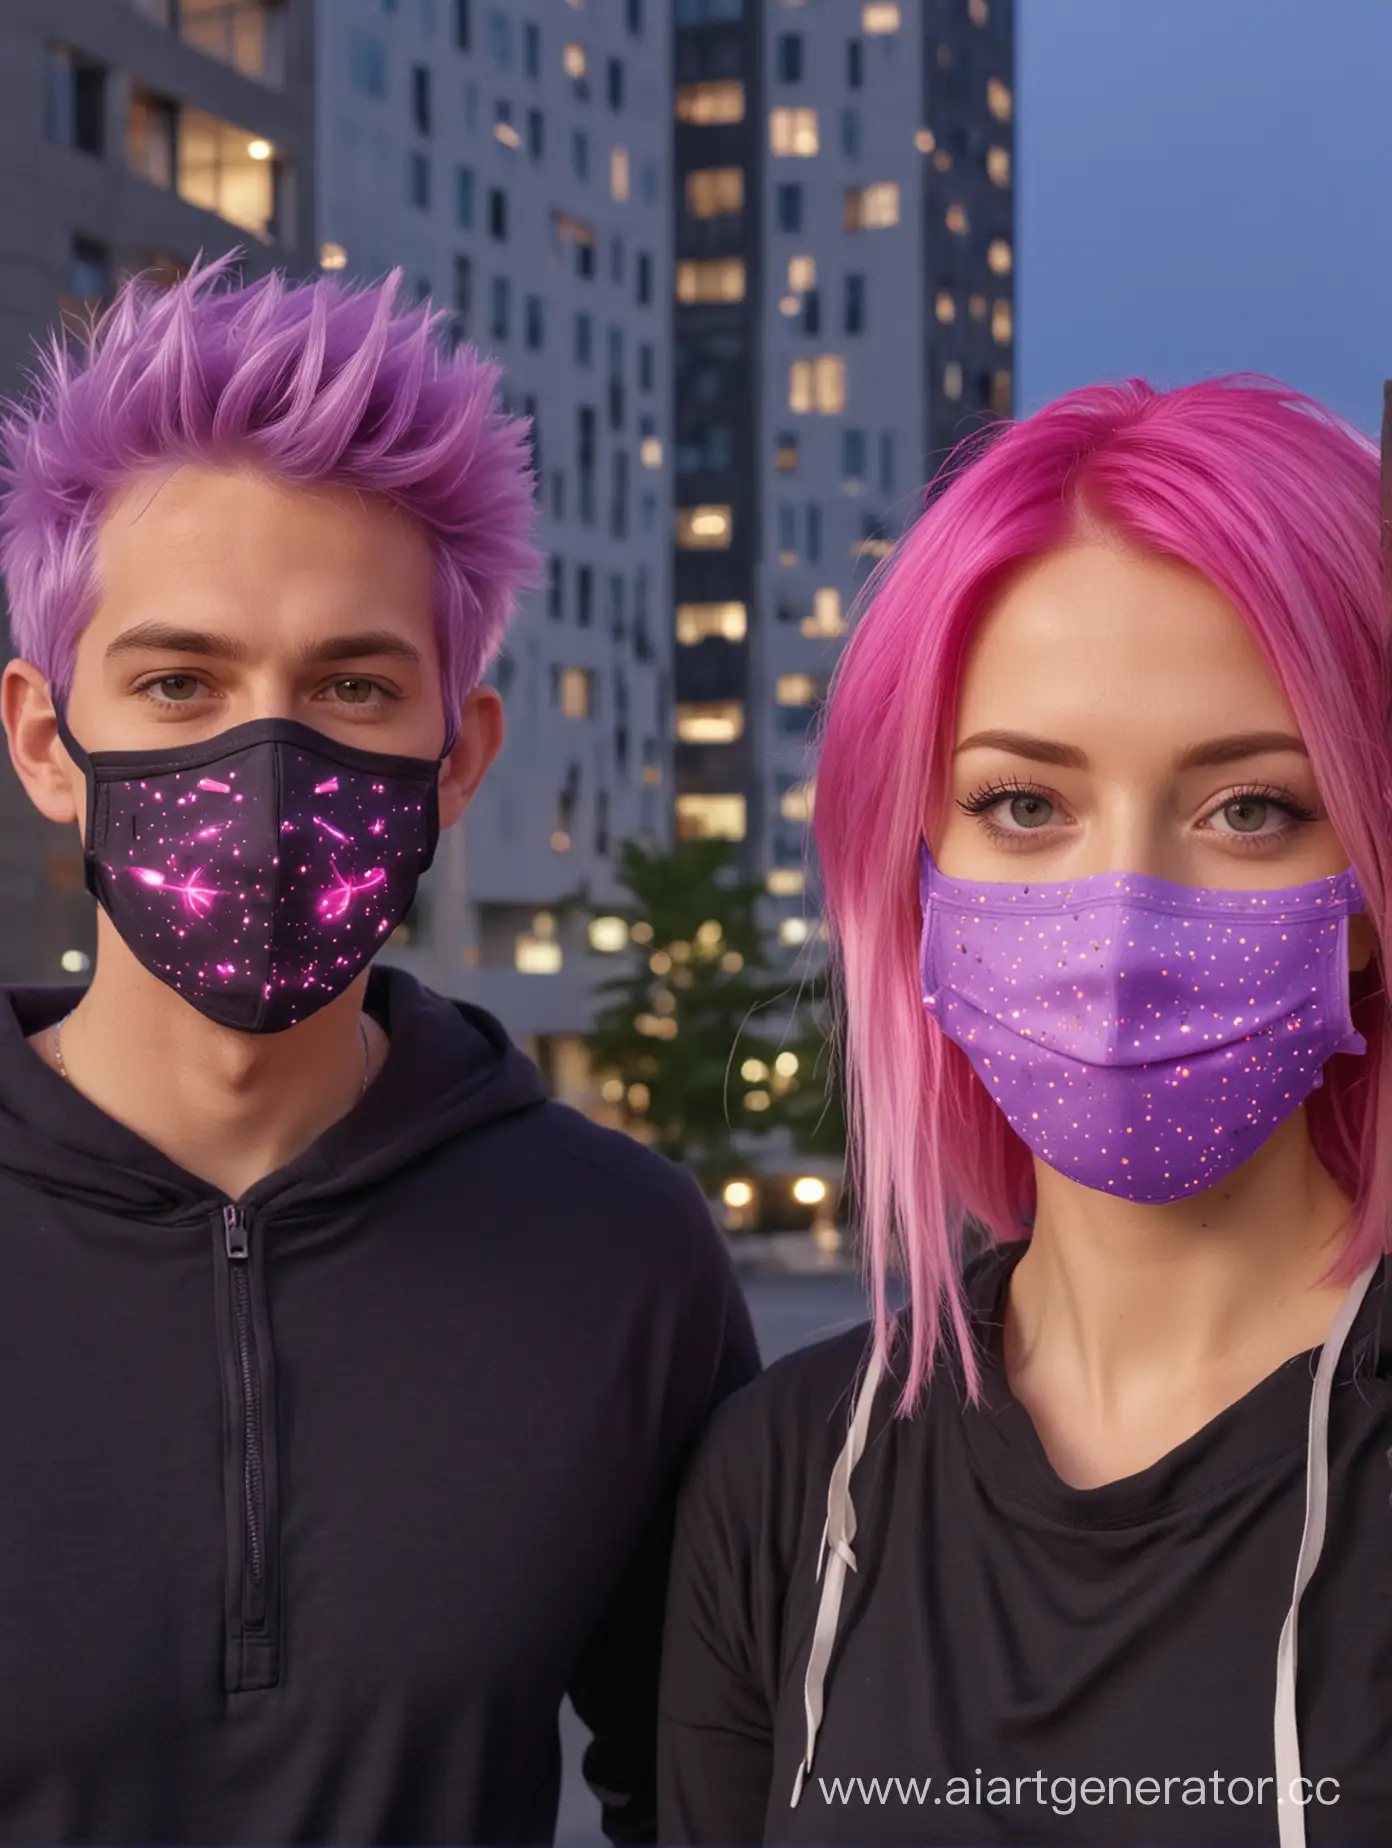 Glowing-PinkHaired-Couple-with-Purple-Face-Masks-in-Urban-Setting